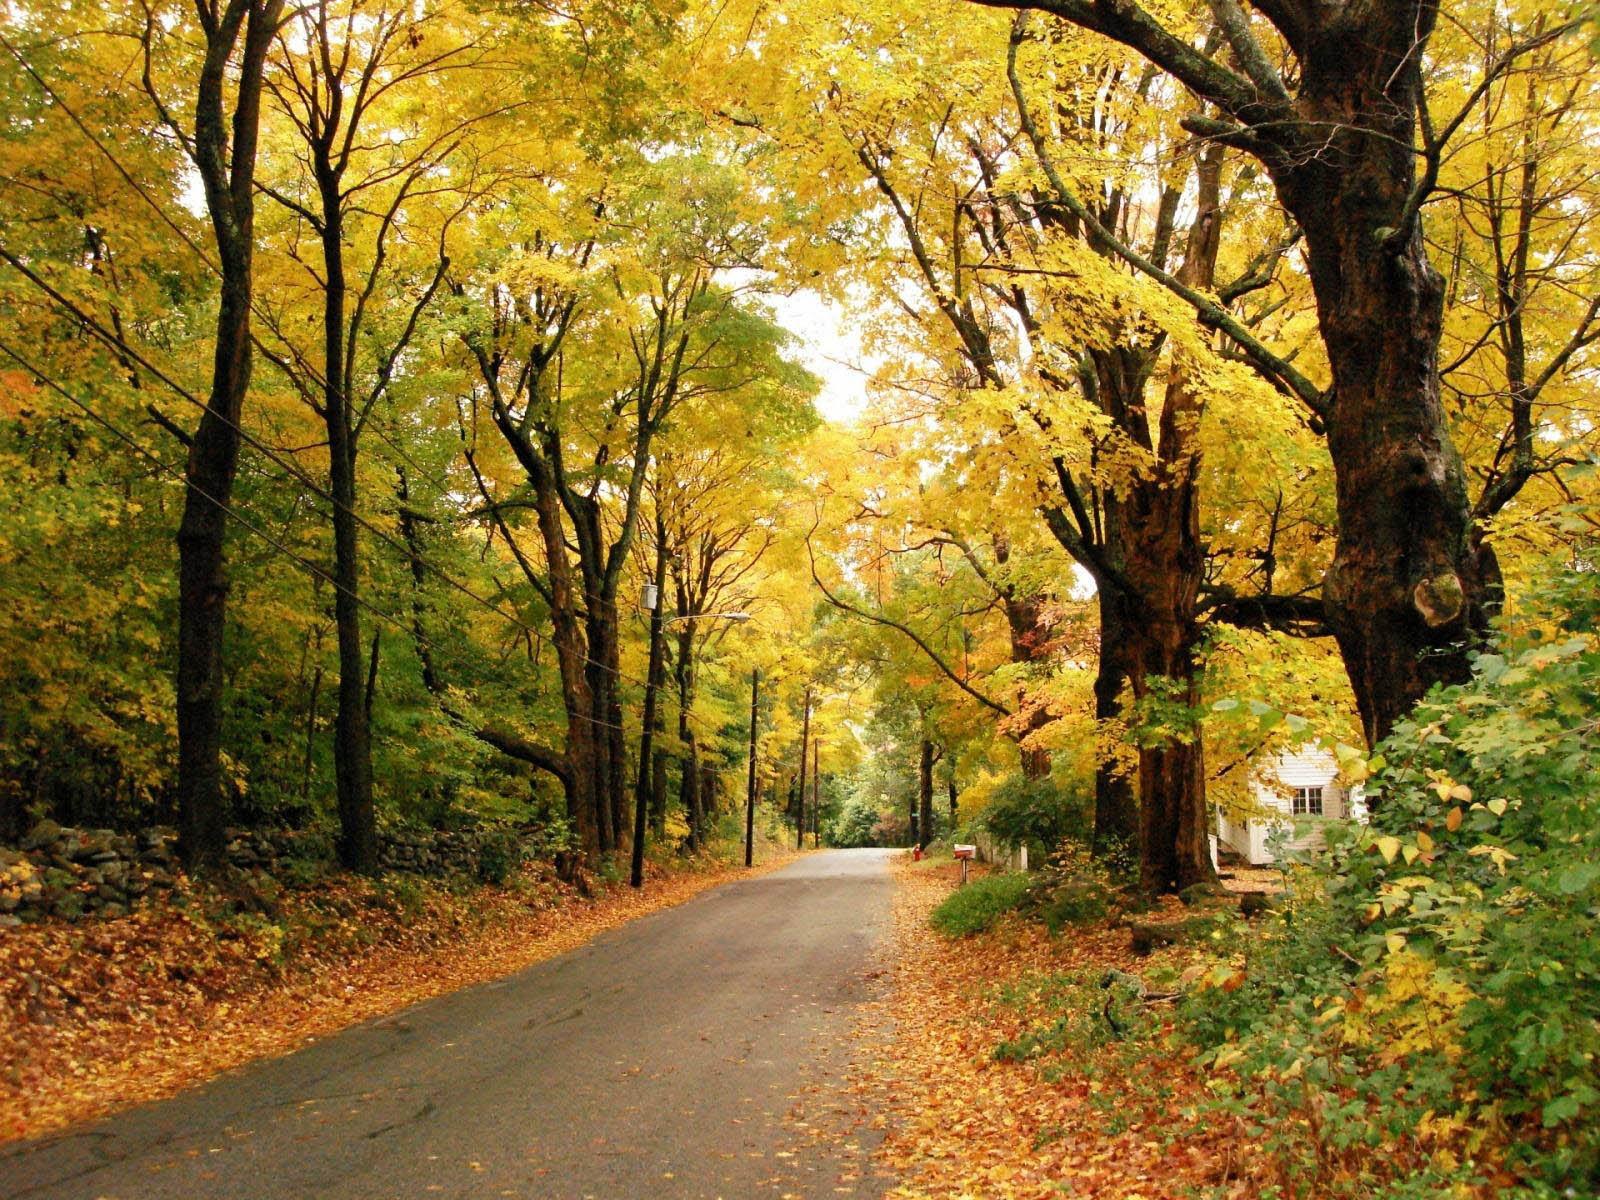 Autumn Road Scenery Wallpaper On This Background Website